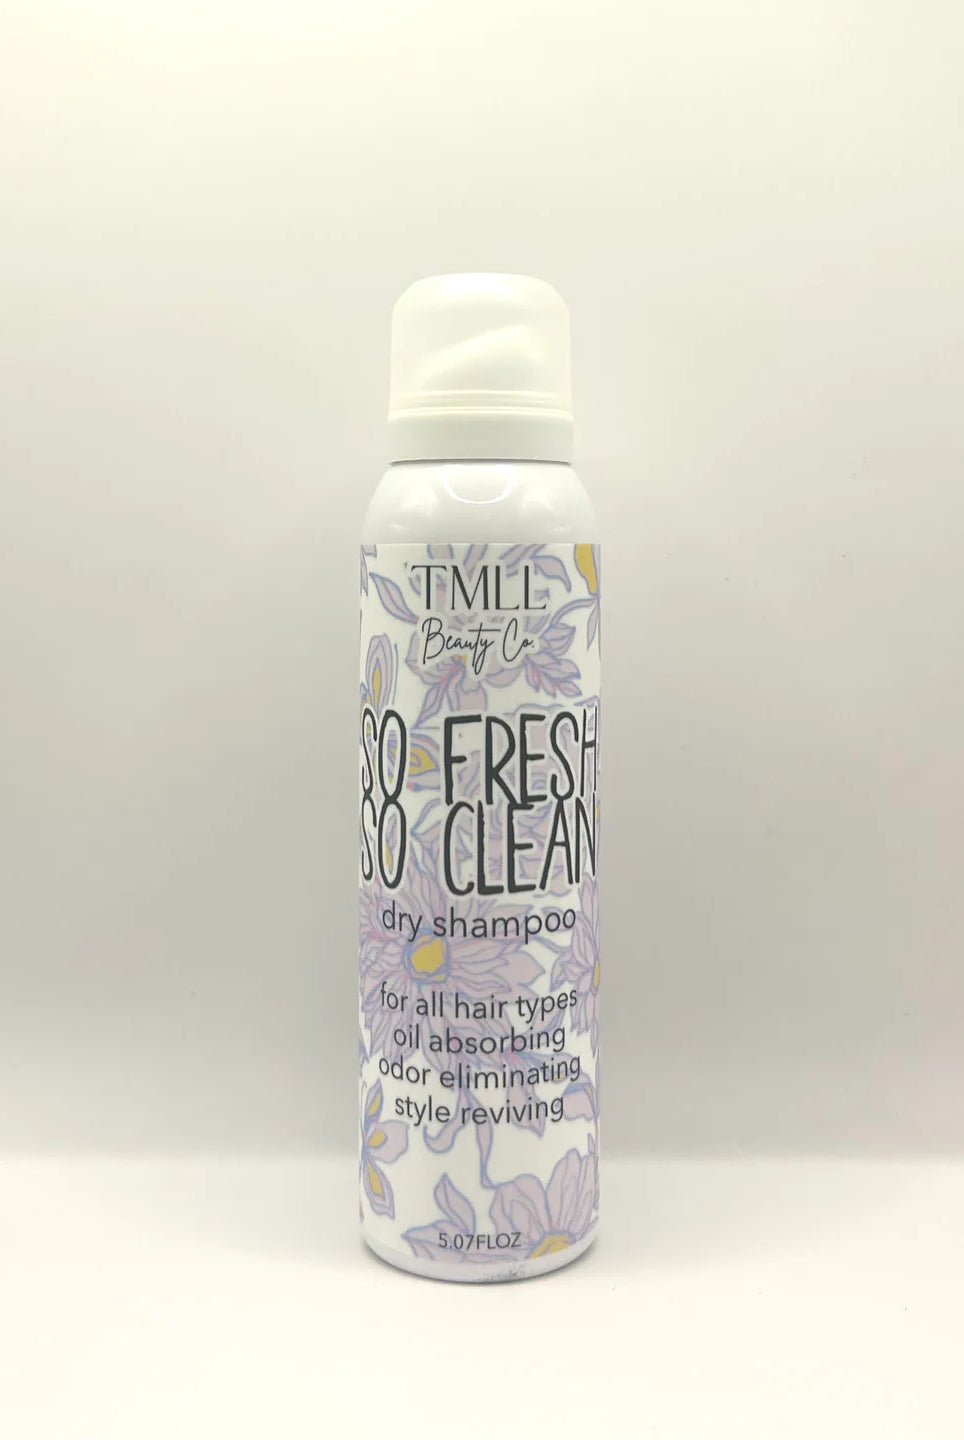 SO FRESH SO CLEAN DRY SHAMPOO-Dry Shampoo-The Lovely Closet-The Lovely Closet, Women's Fashion Boutique in Alexandria, KY